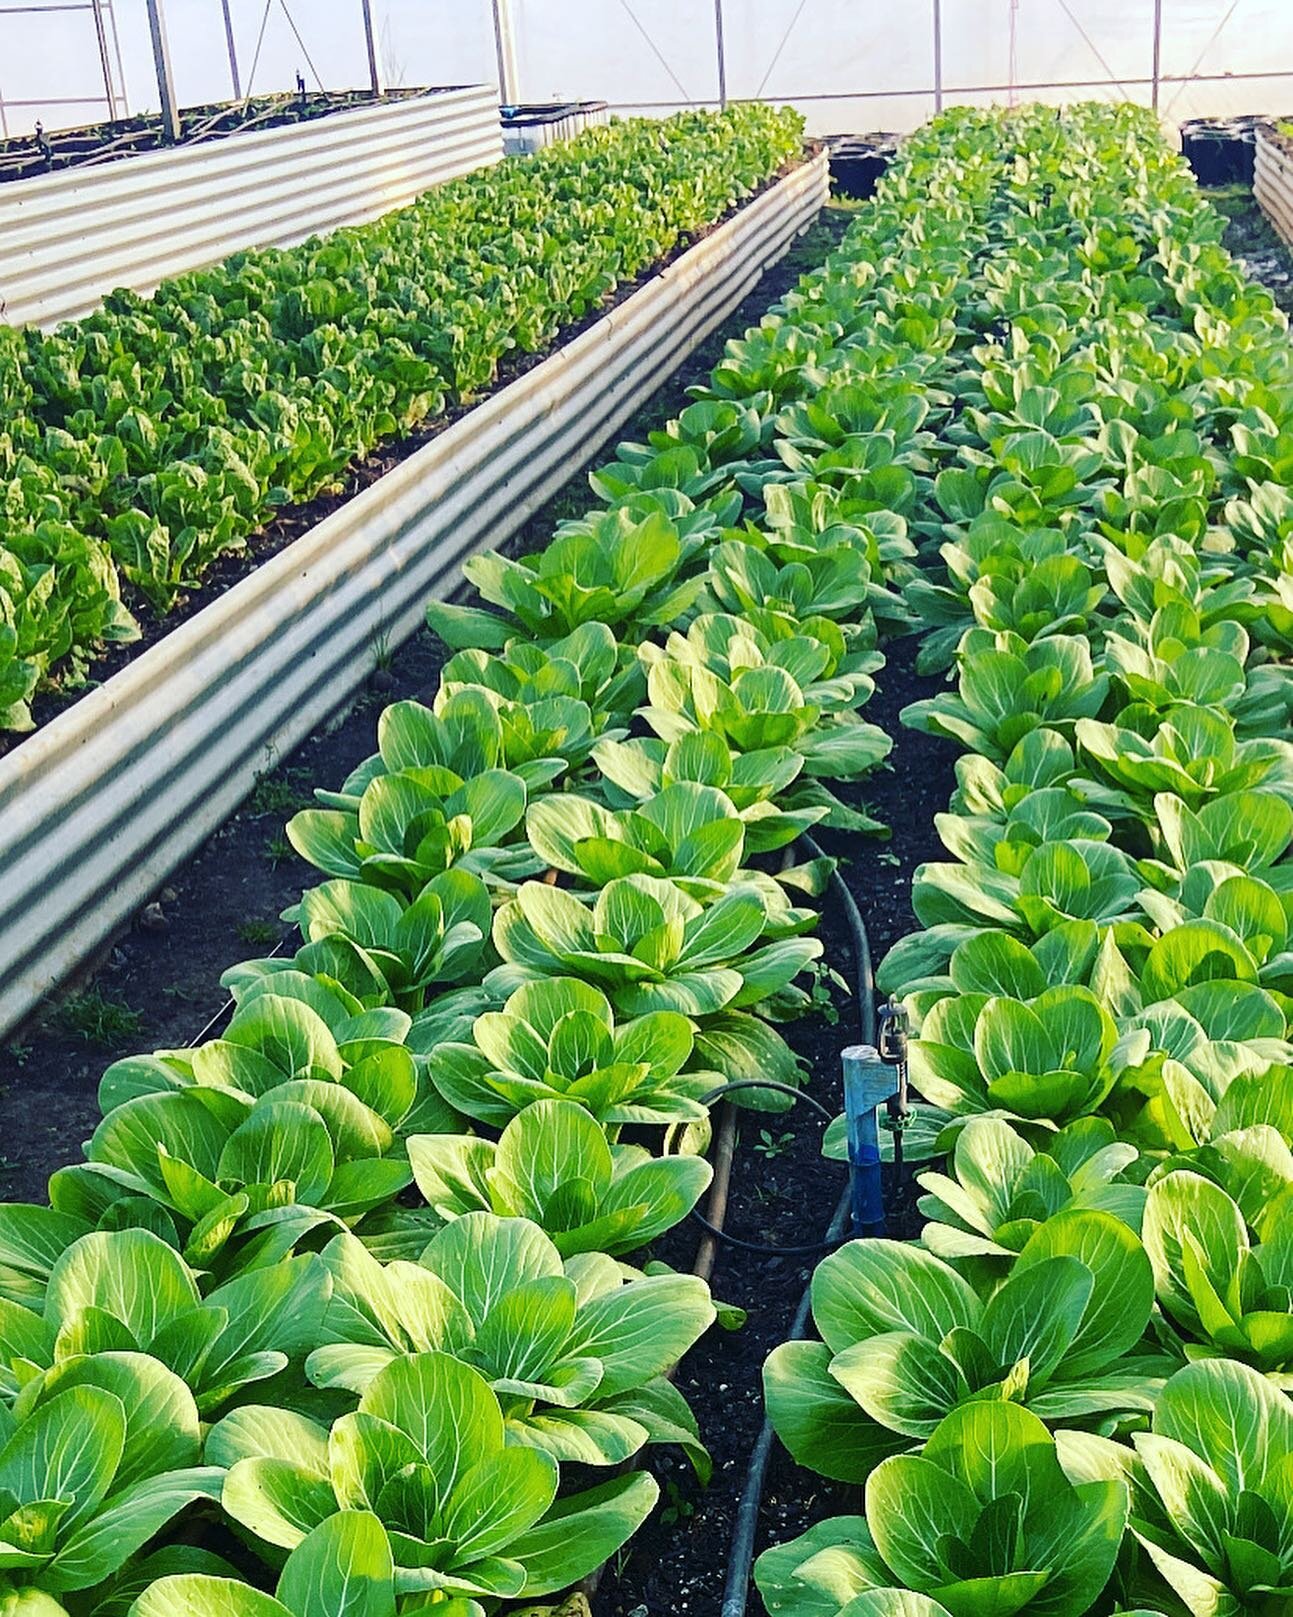 Whether your hydroponic or organic growtunnels provide a protected cropping environment which helps reduce crop losses, boosts yield and reduces reliance on machinery, pesticides, herbicides and fossil fuels.